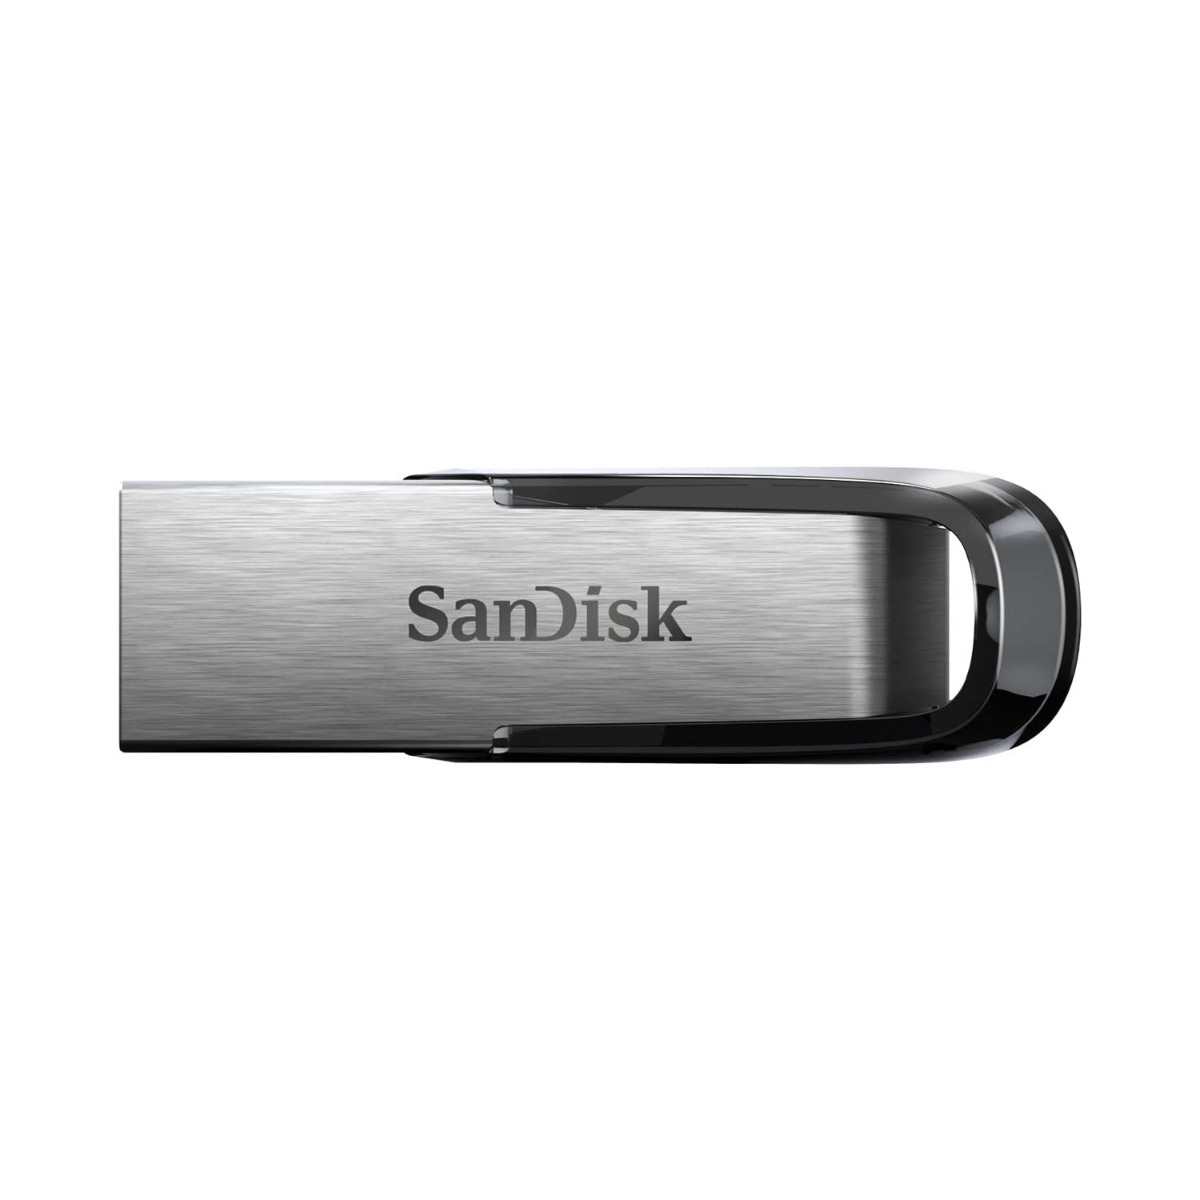 SanDisk Ultra Flair 512GB, USB 3.0, 150MB/s Read, Durable - Silver / Black